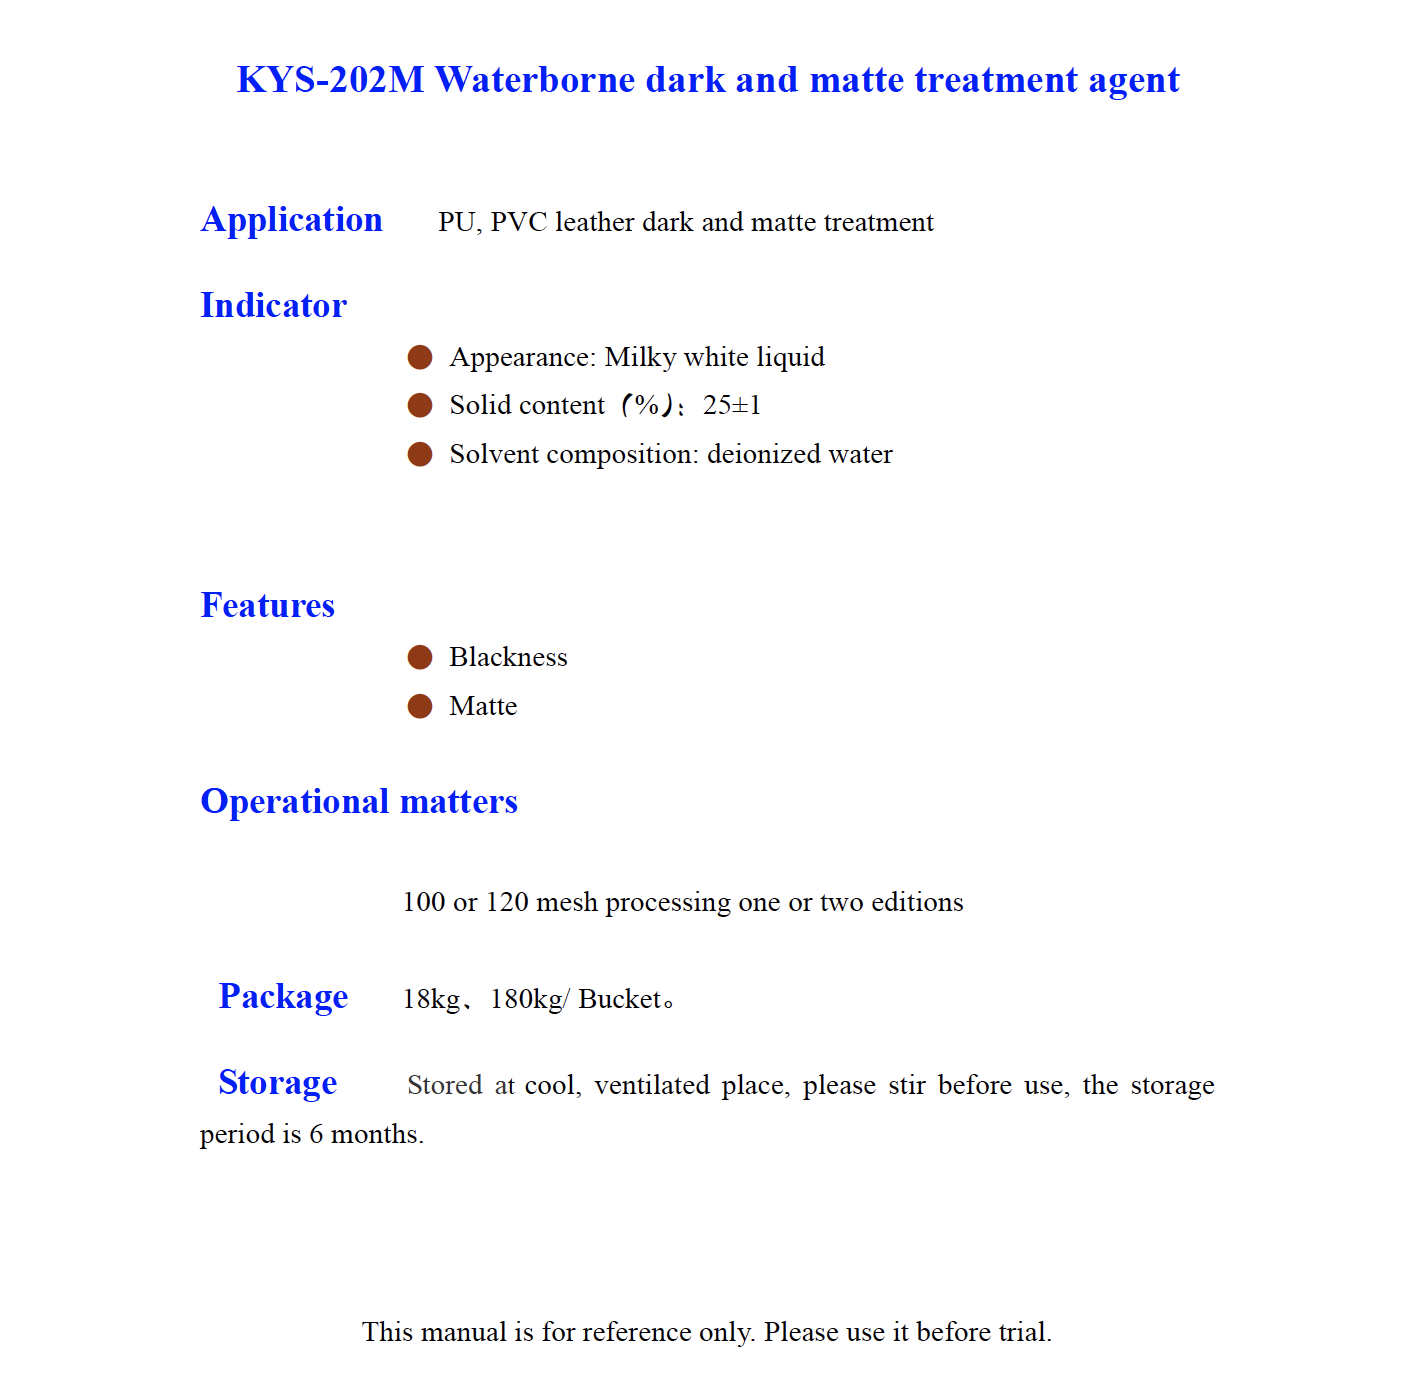 KYS 202M Waterborne dark and matte t reatment agent